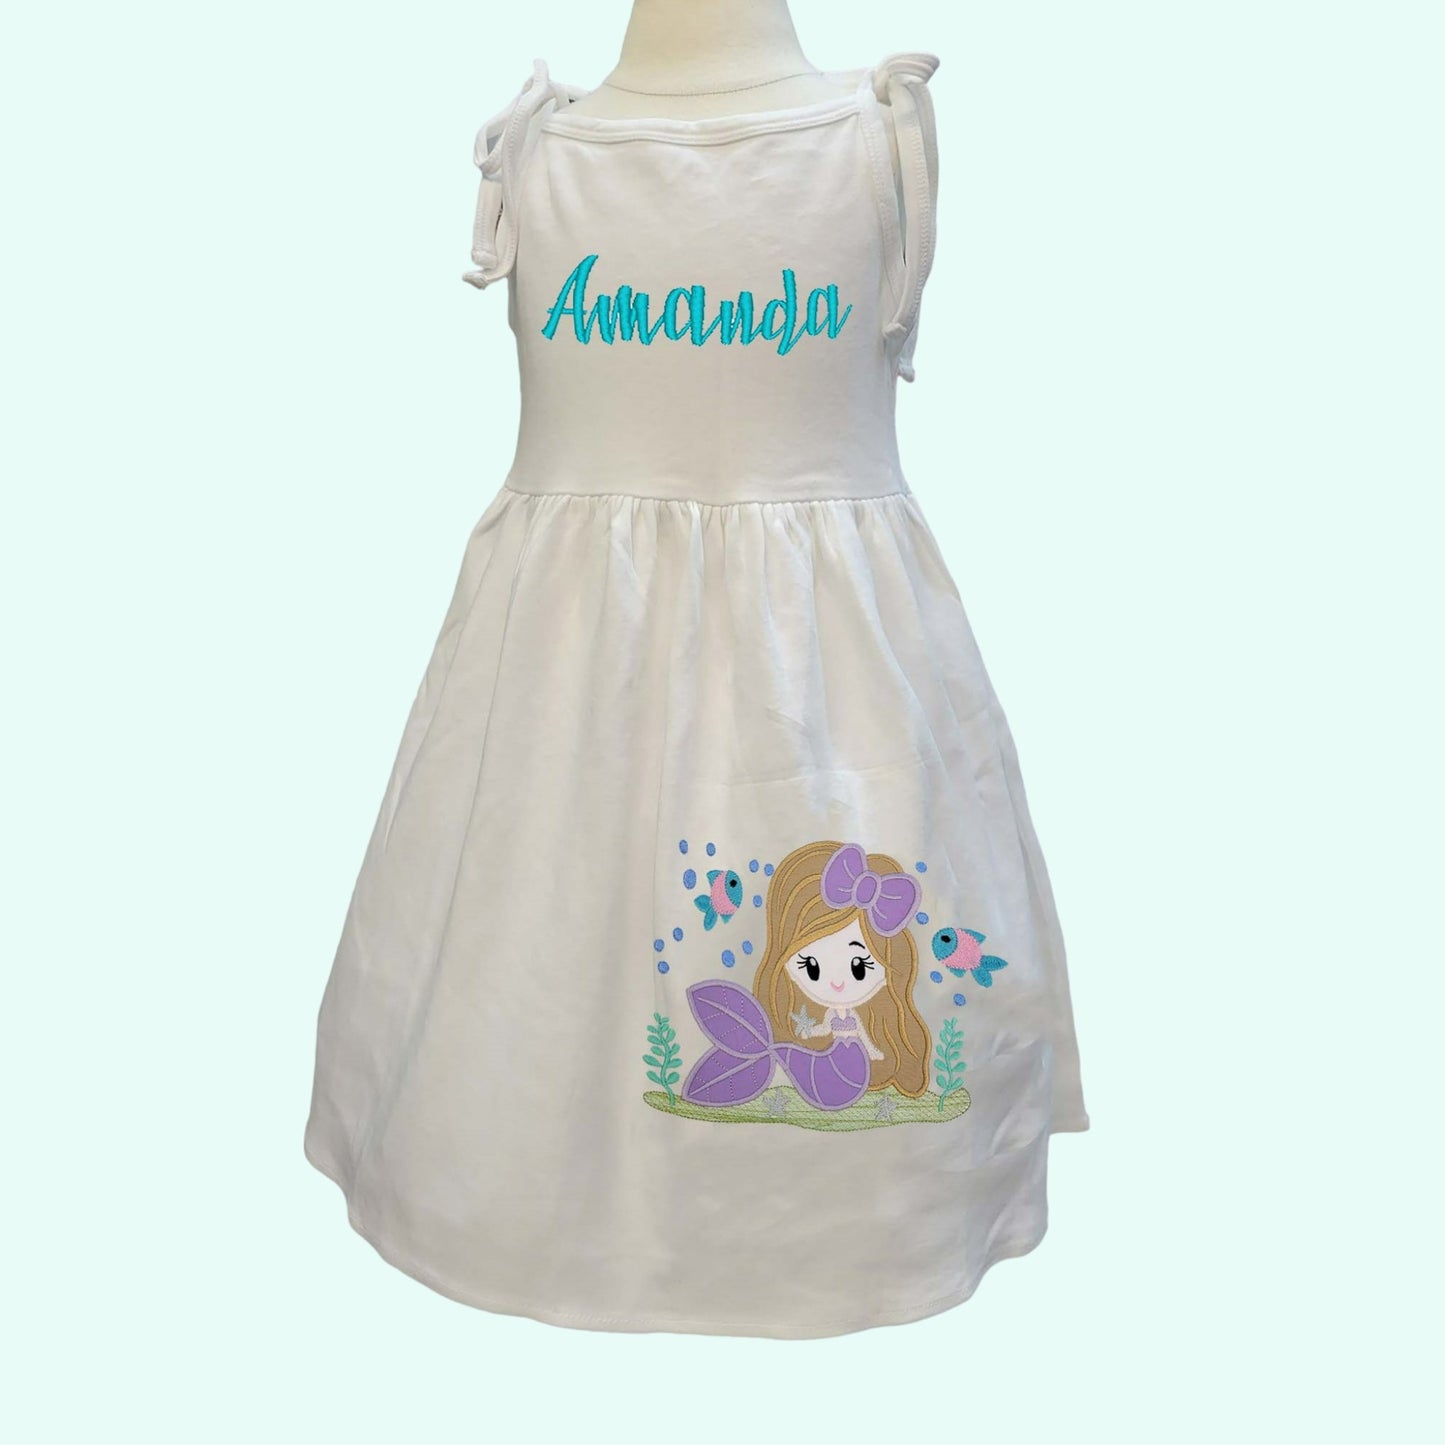 Mermaid Dress Girls Mermaid dress, Mermaid sundress,  Personalized Birthday outfit, Girl's Birthday outfit